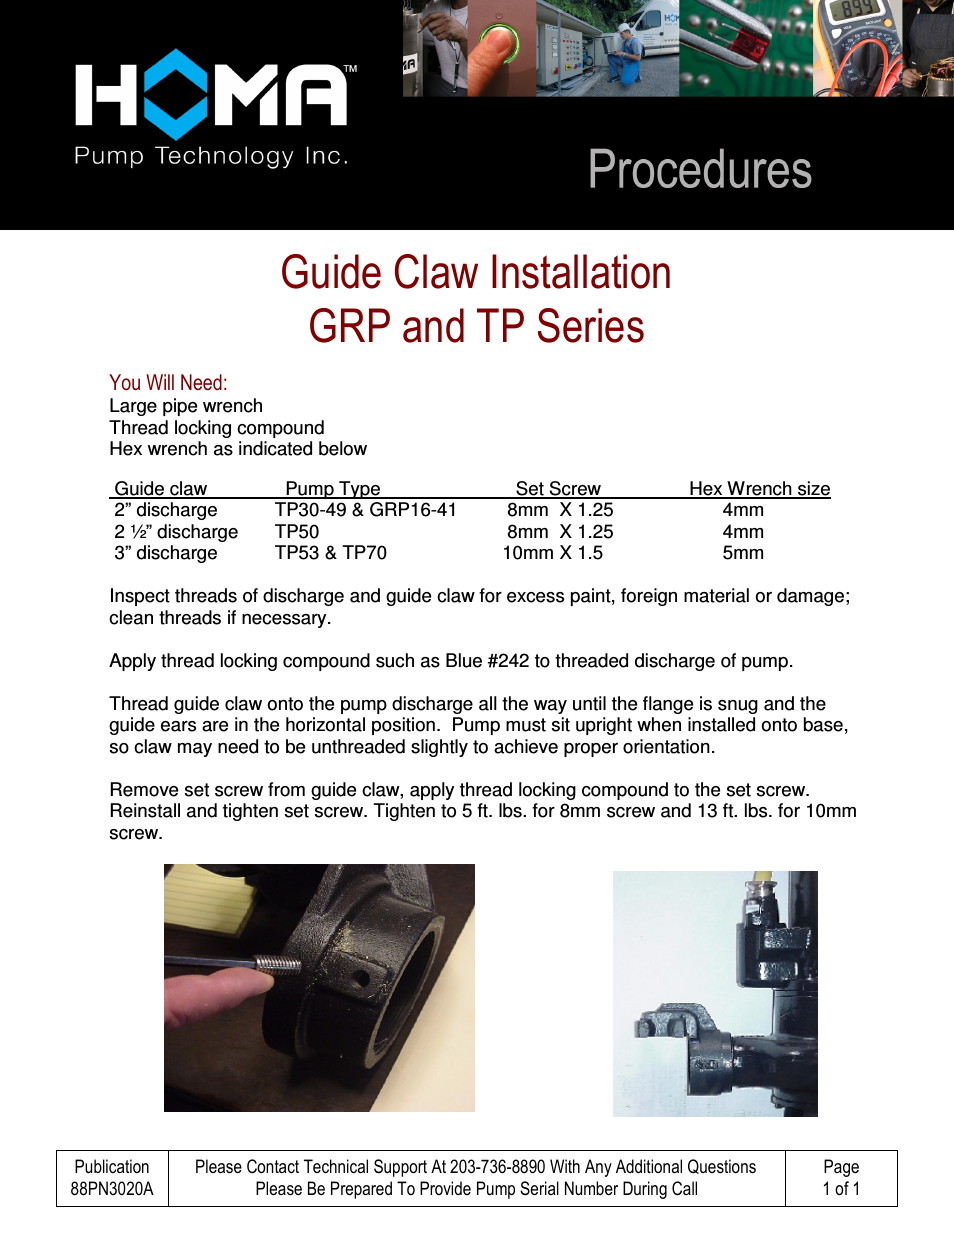 Guide Claw Installation GRP TP Series